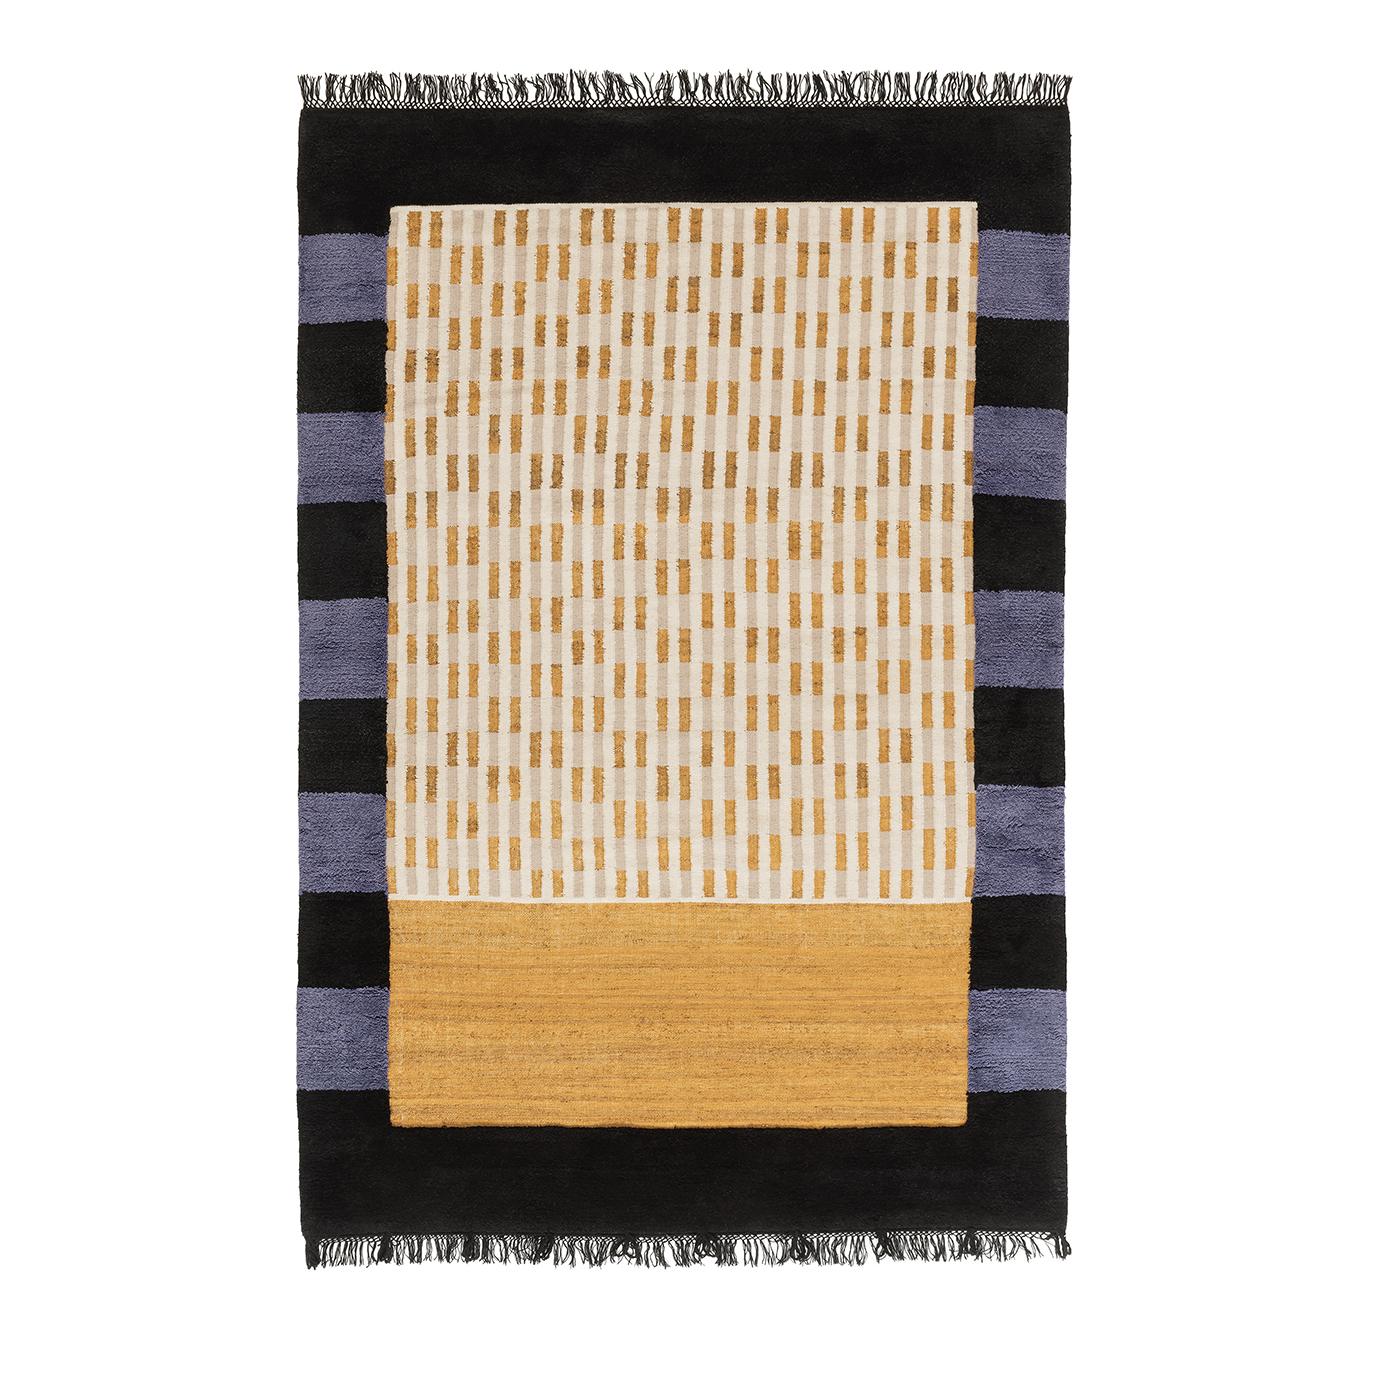 Unique and modern, this rug will make a statement in any contemporary decor. It was entirely hand woven using a mix of 45% wool, 45% jute, and 10% cotton. The final effect is a combination of soft and coarse textures, with a decoration of